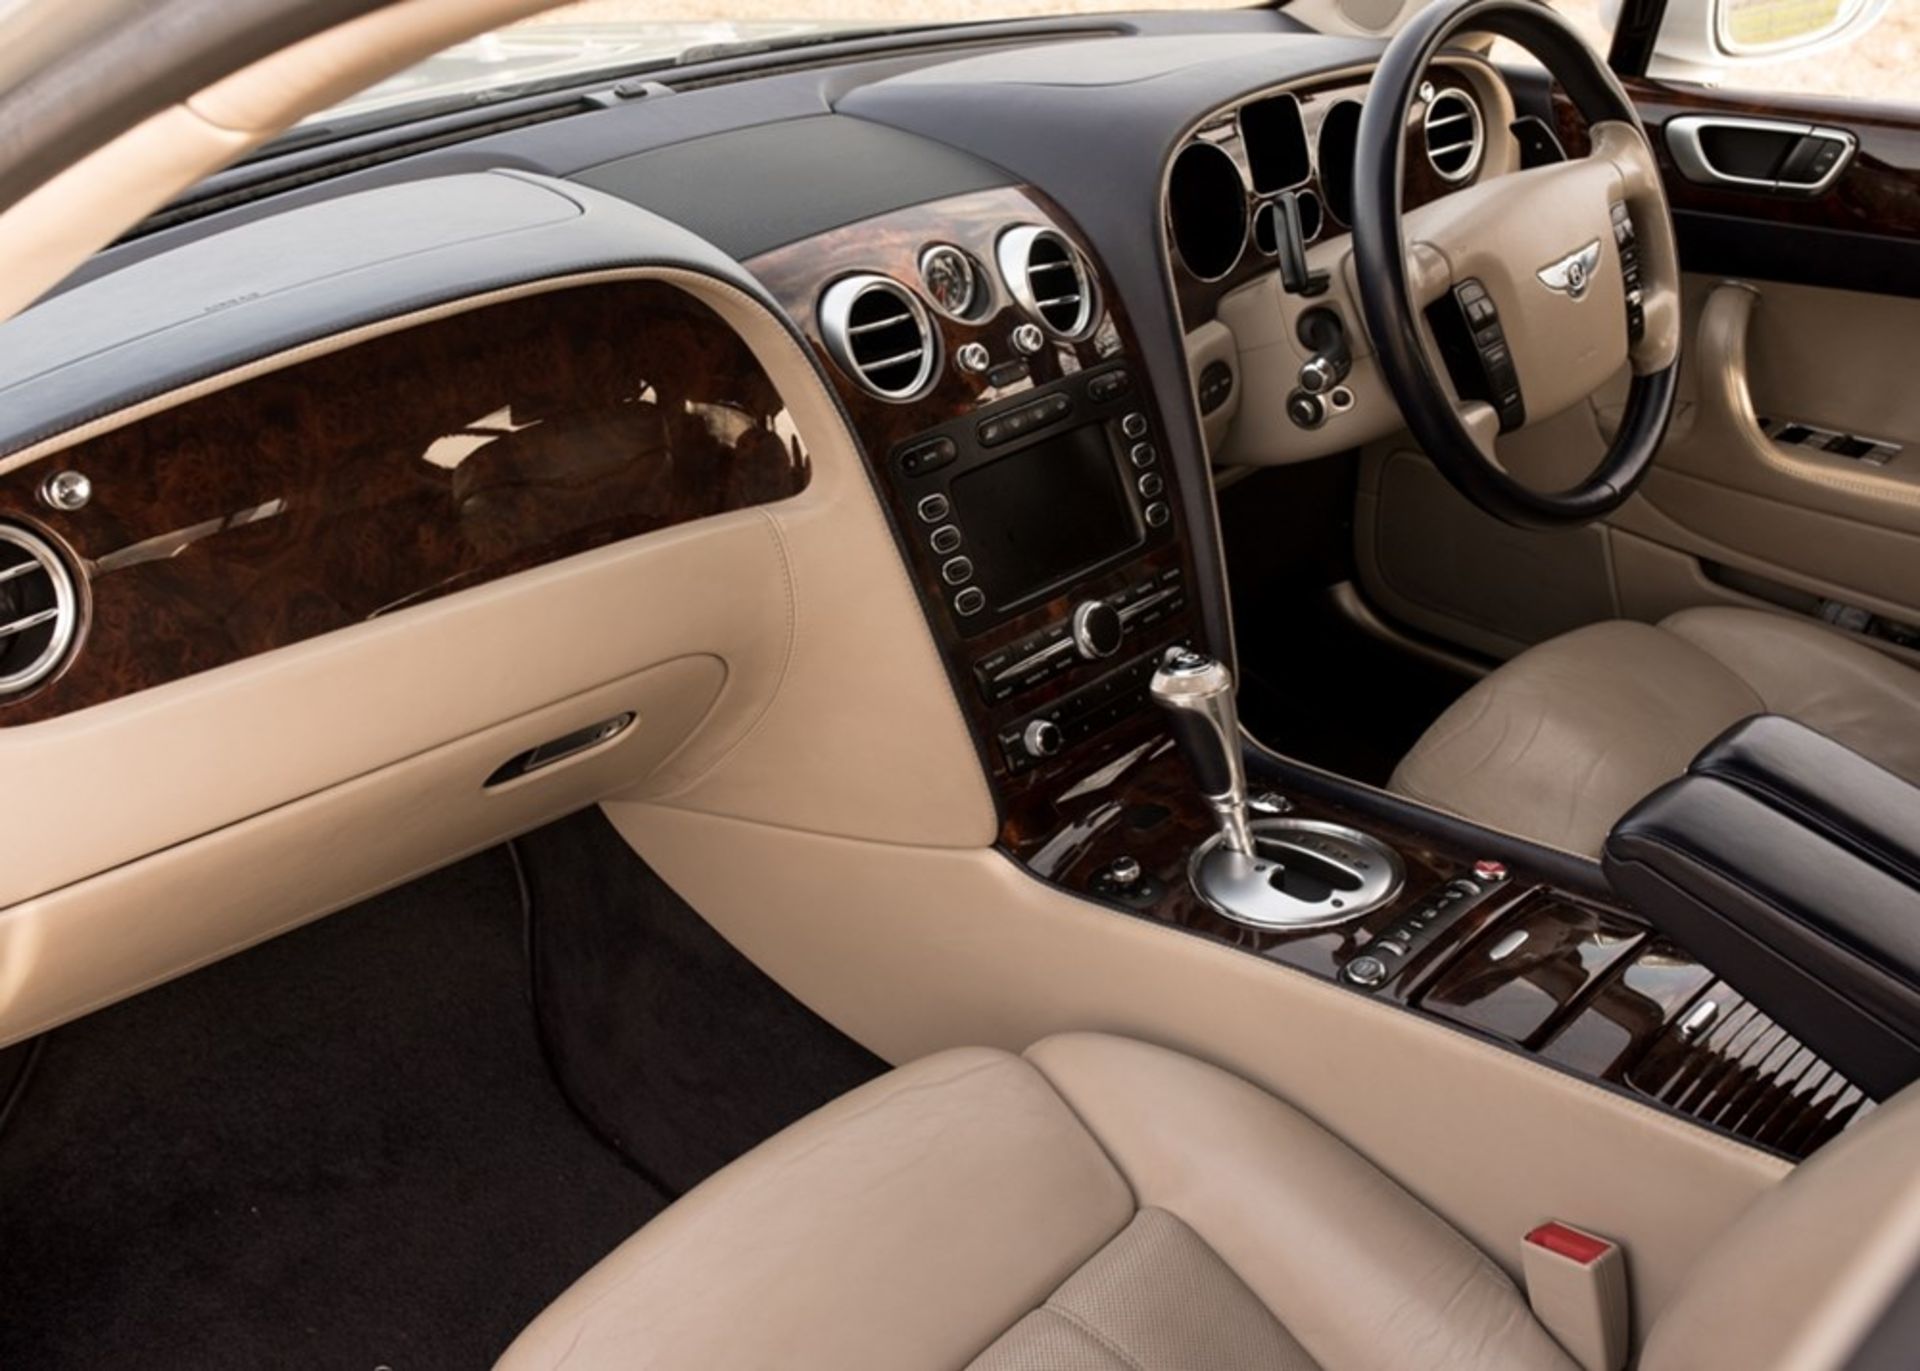 2006 Bentley Continental Flying Spur - Image 4 of 8